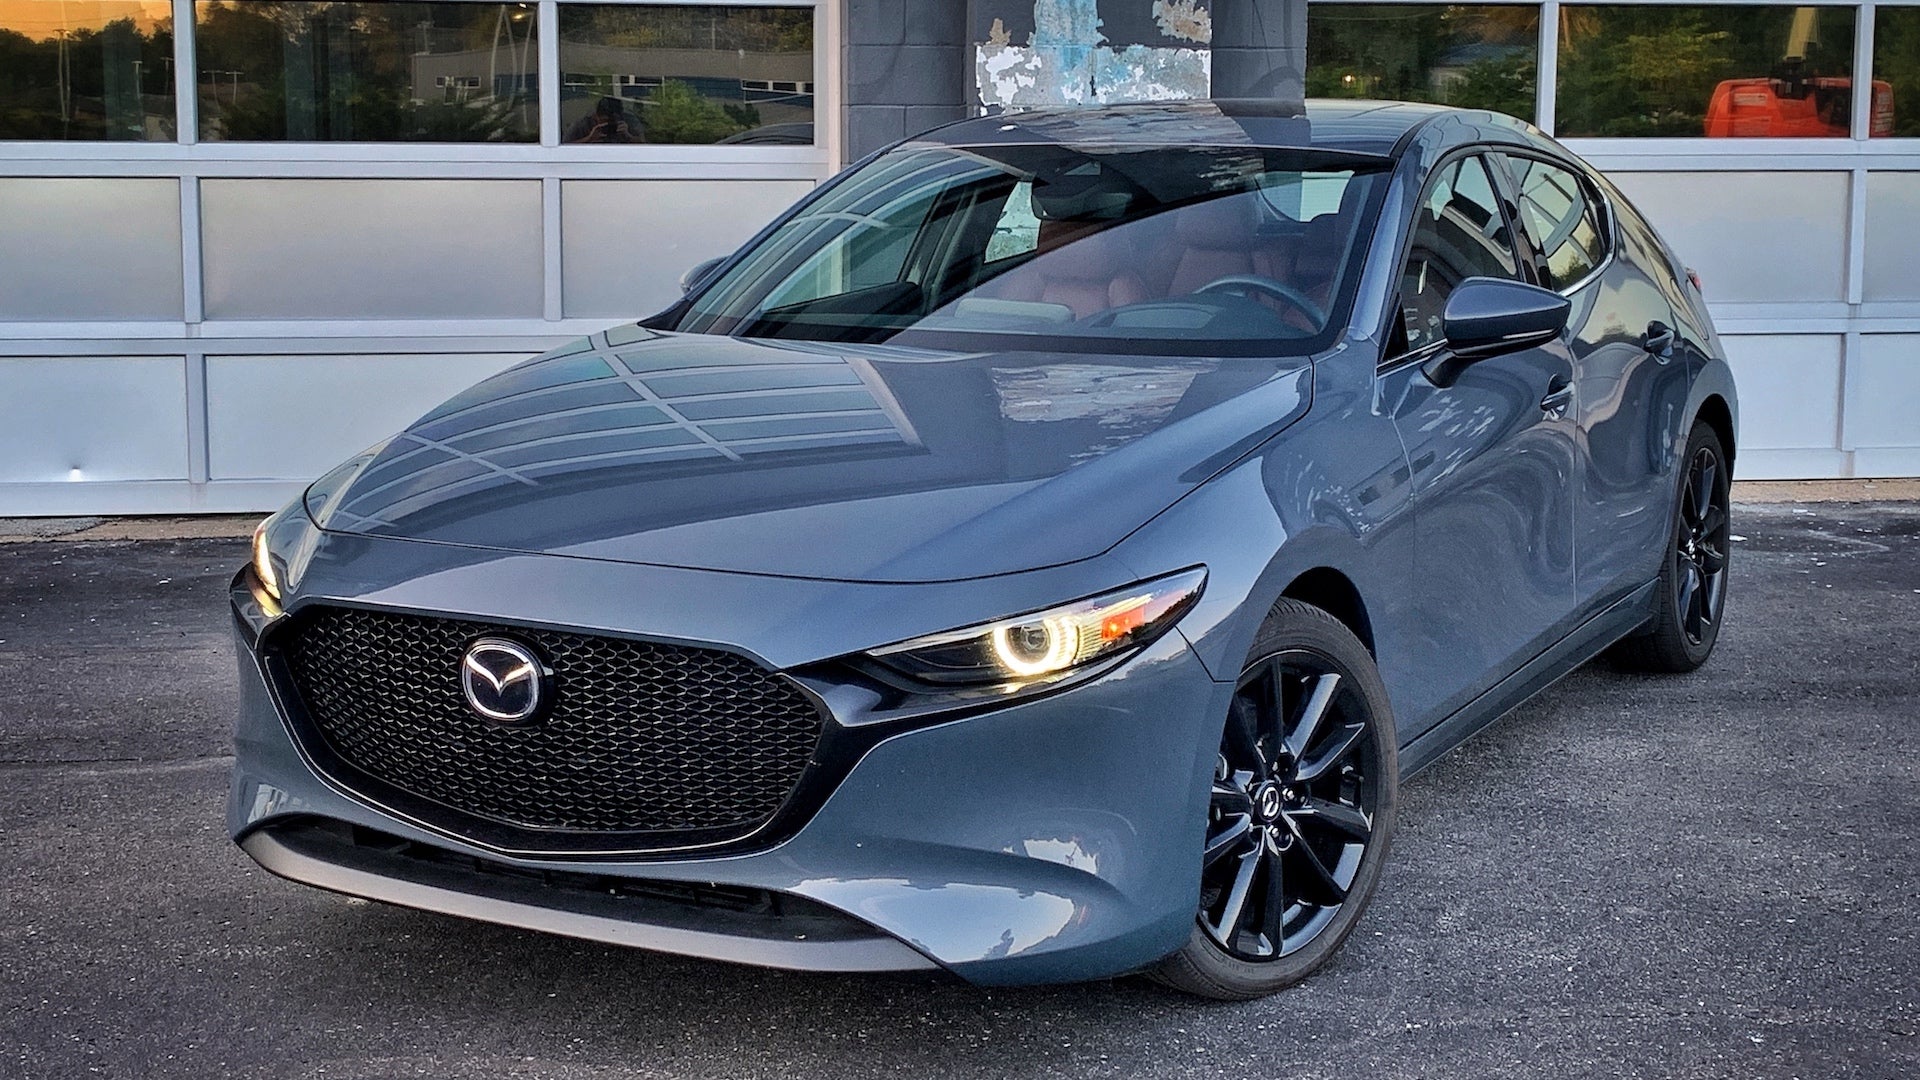 2020 Mazda3 Hatchback Review Quite Possibly All The Car You'll Ever Need